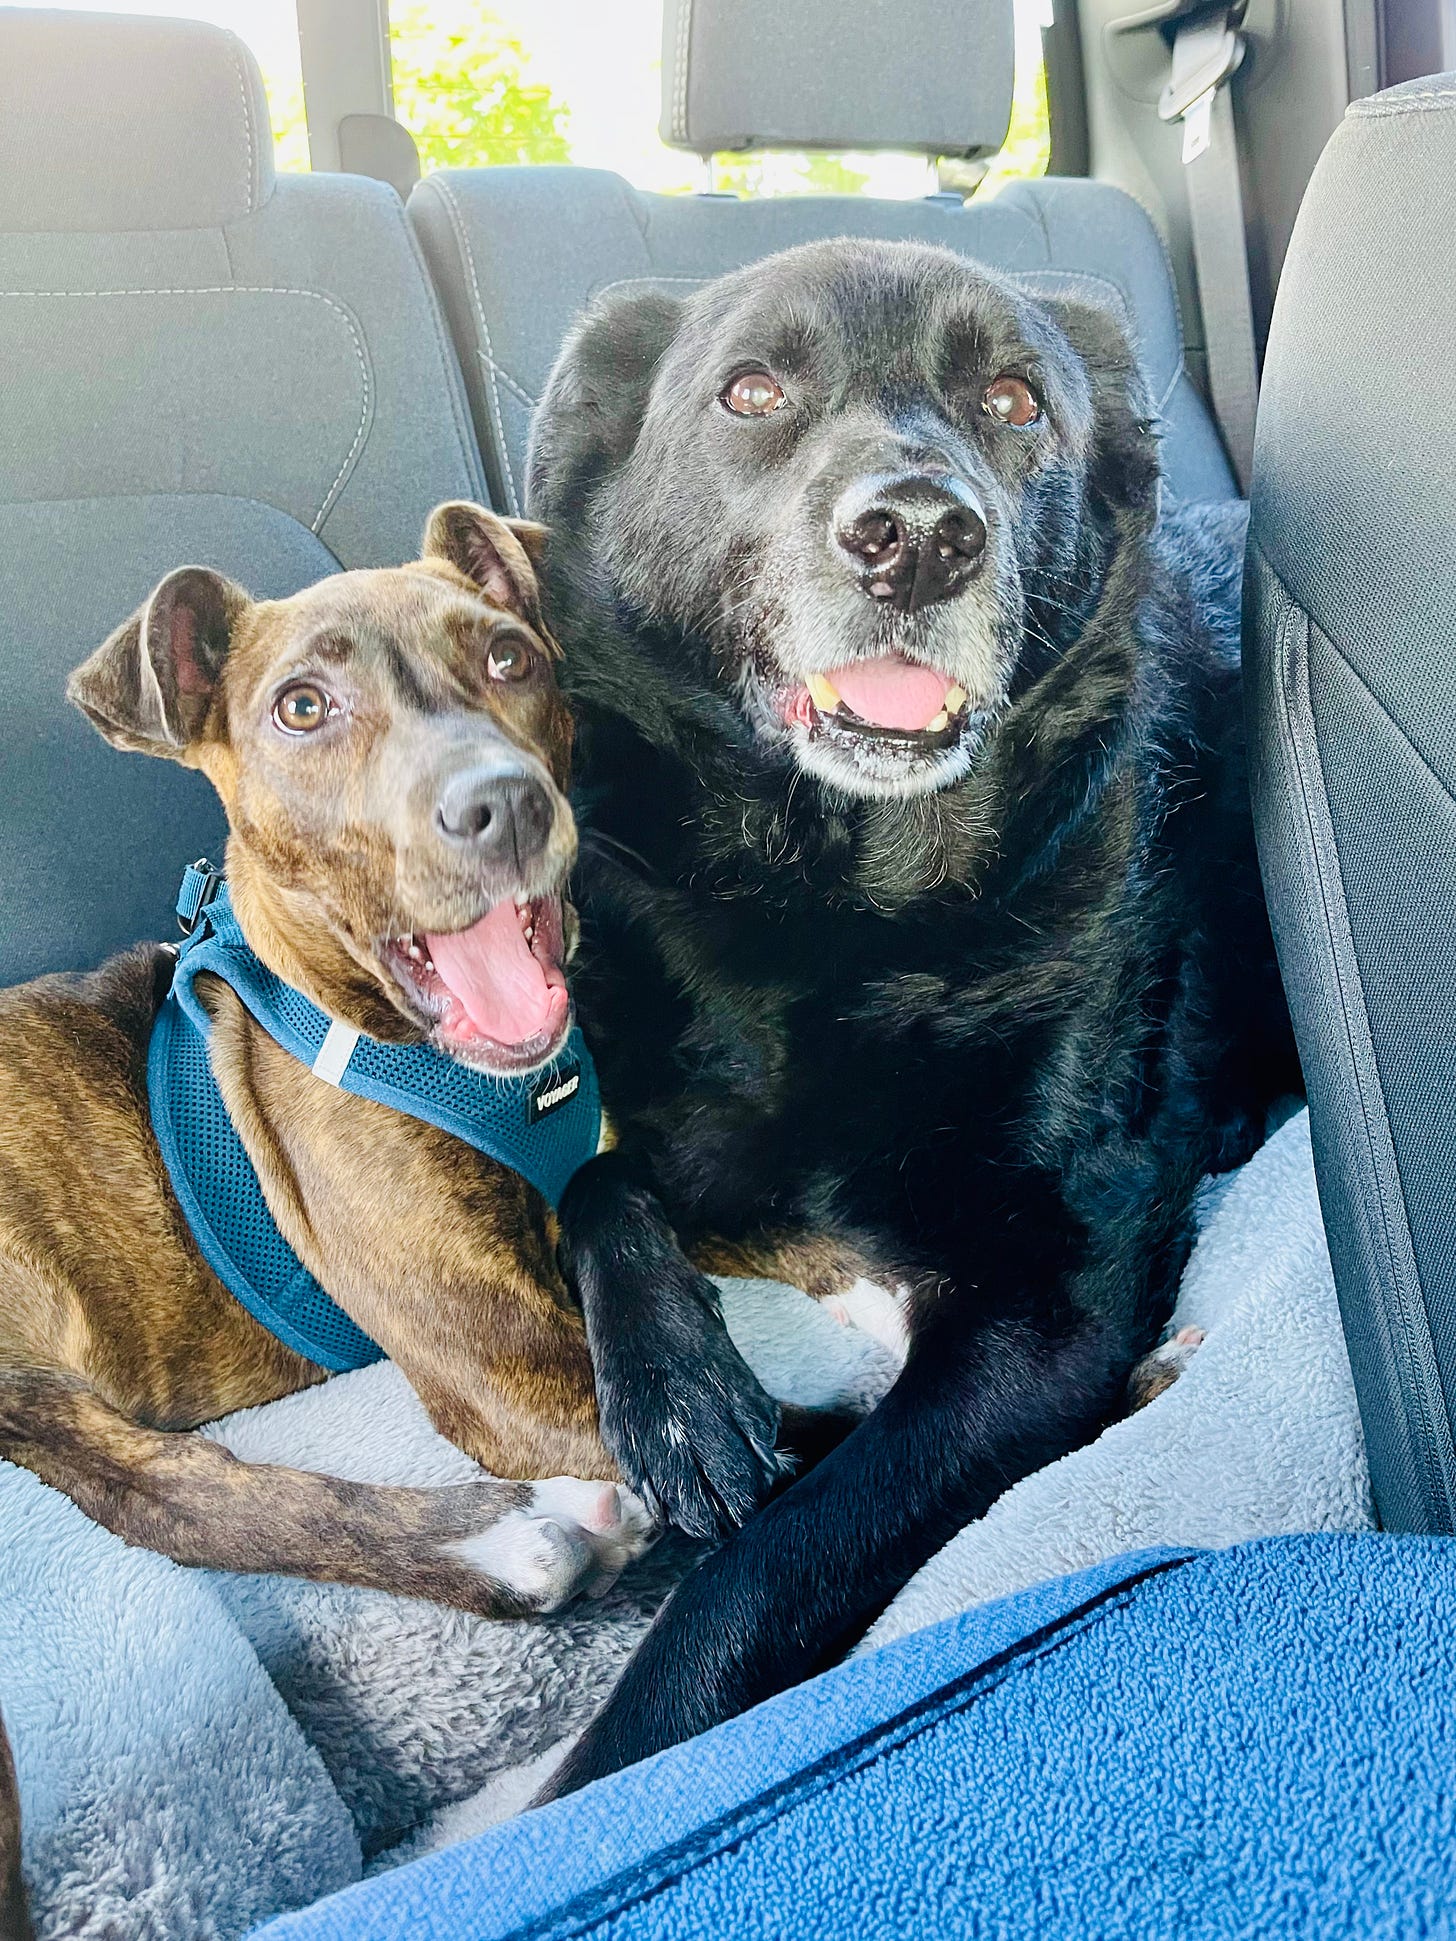 Two dogs cuddling and holding paws on a truck seat